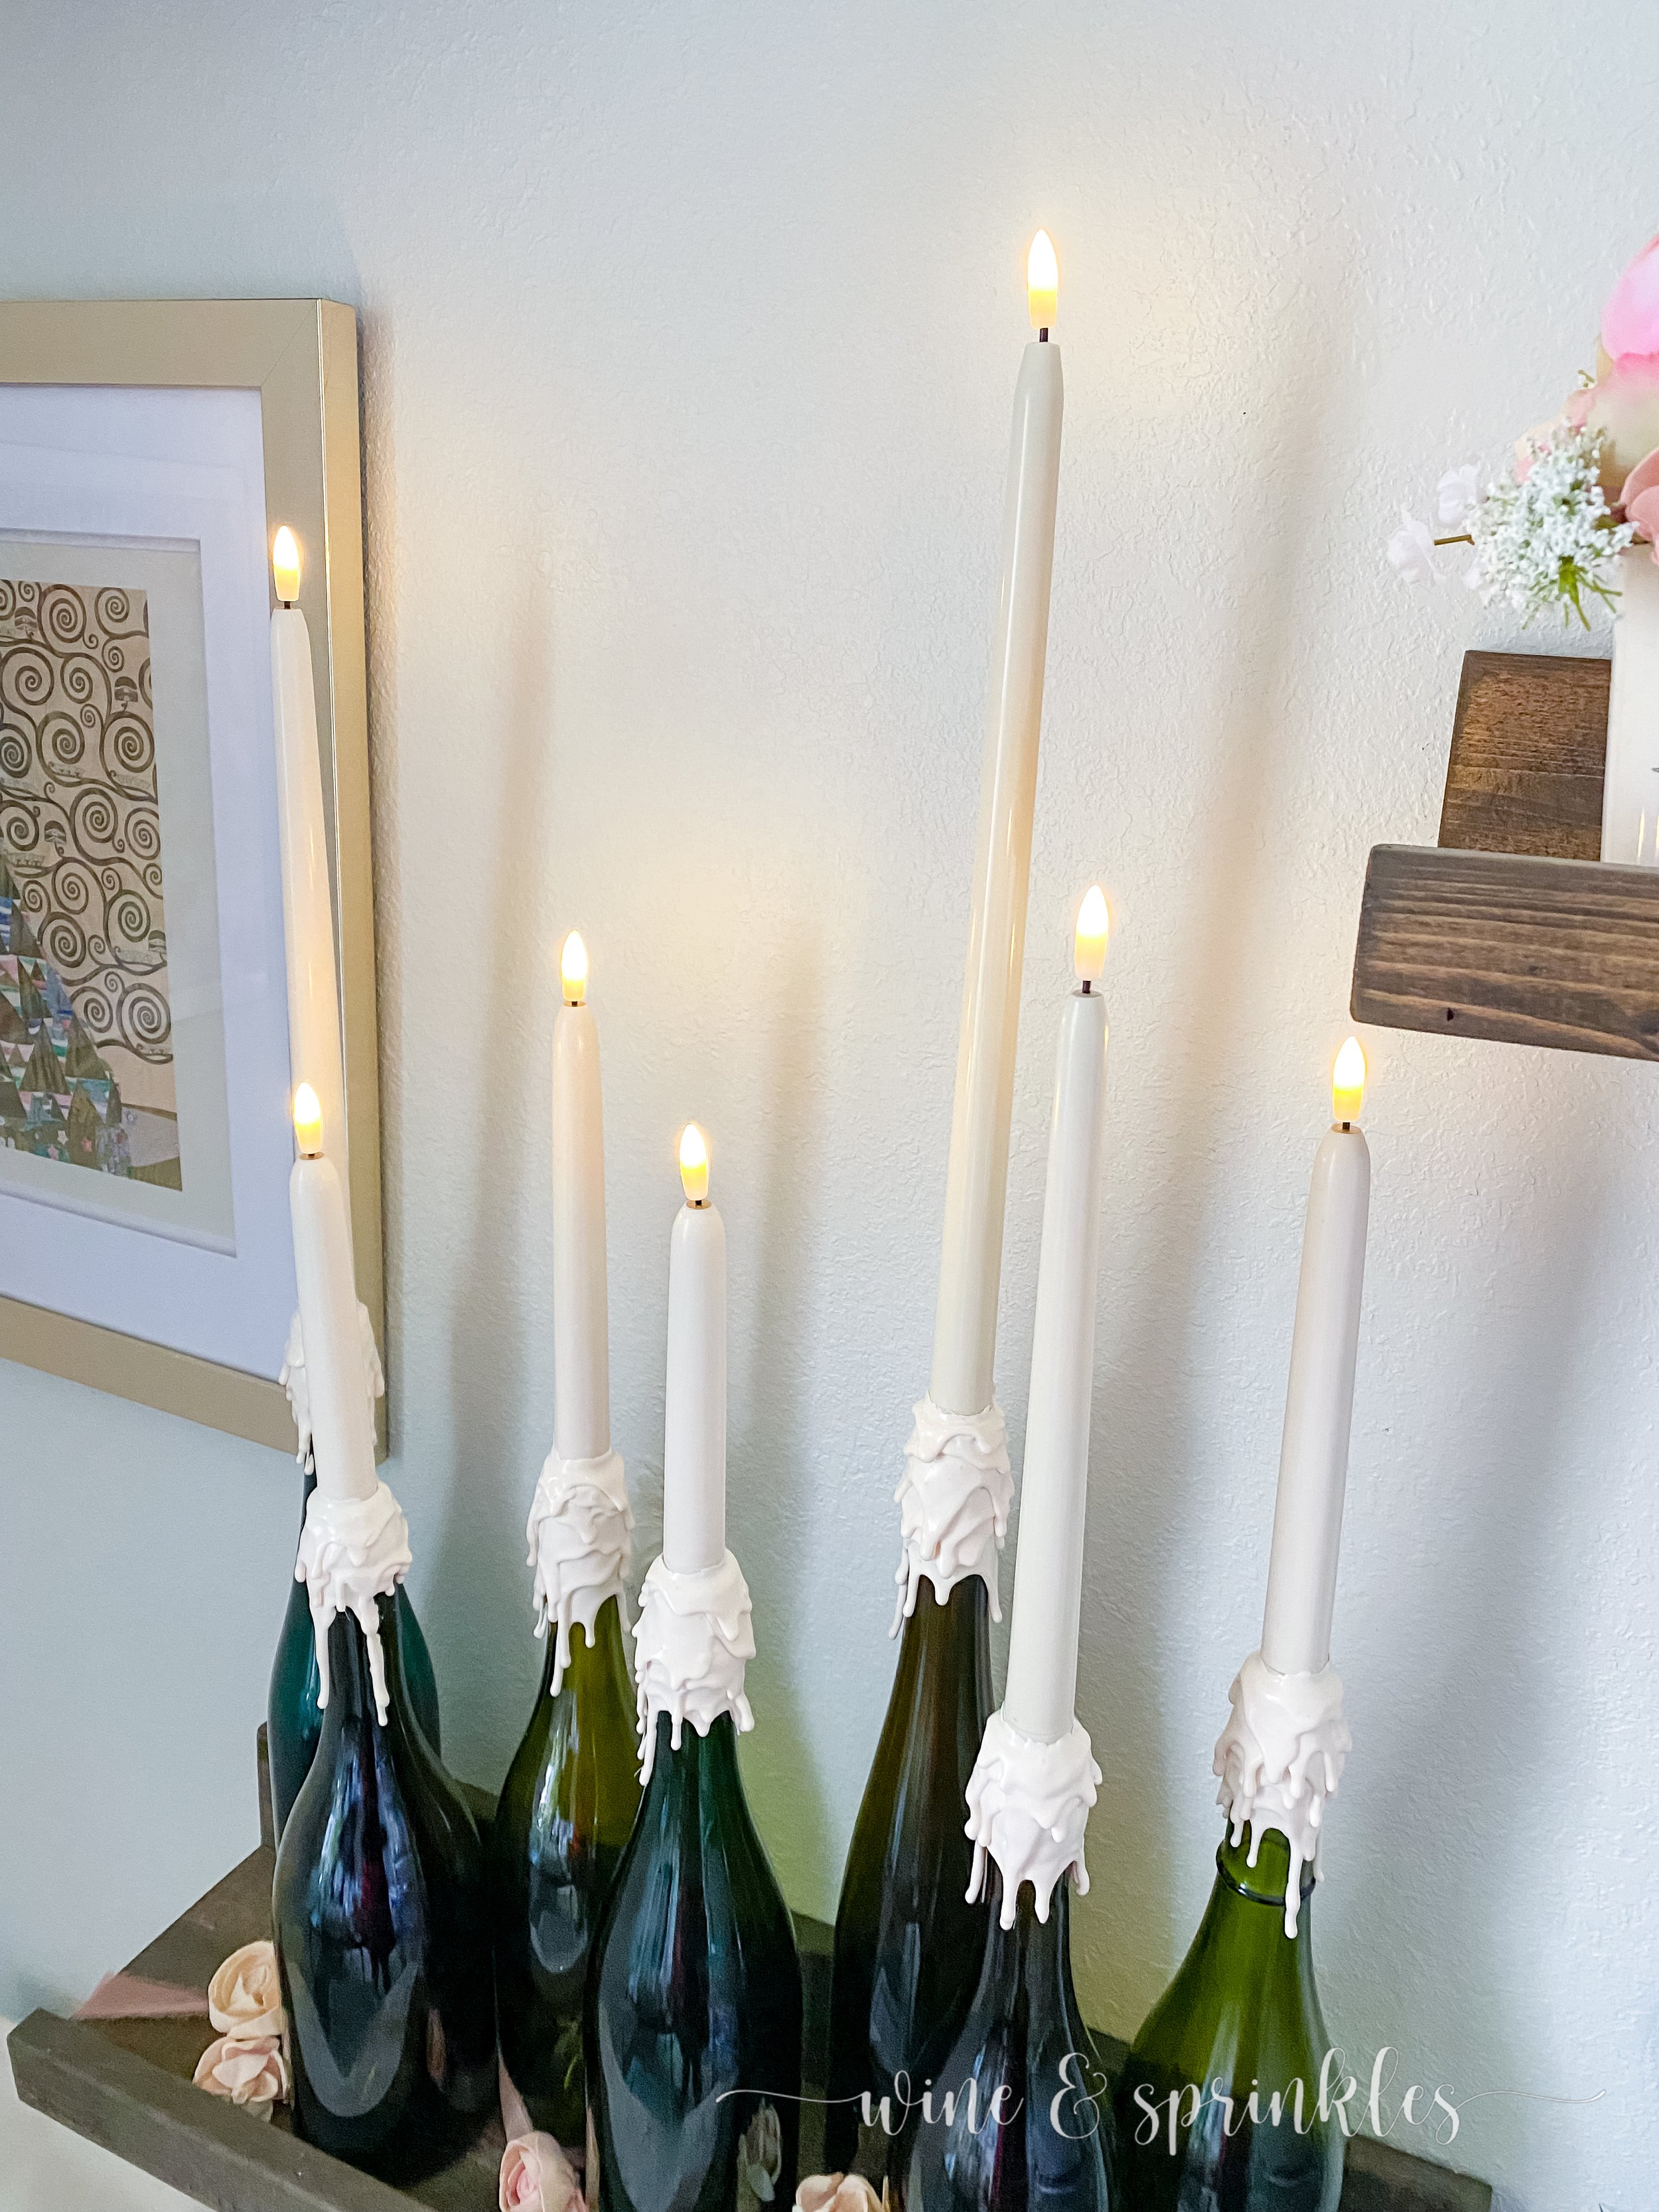 Bottle Candle Covers  Wine bottle, Candle cover, Diy projects